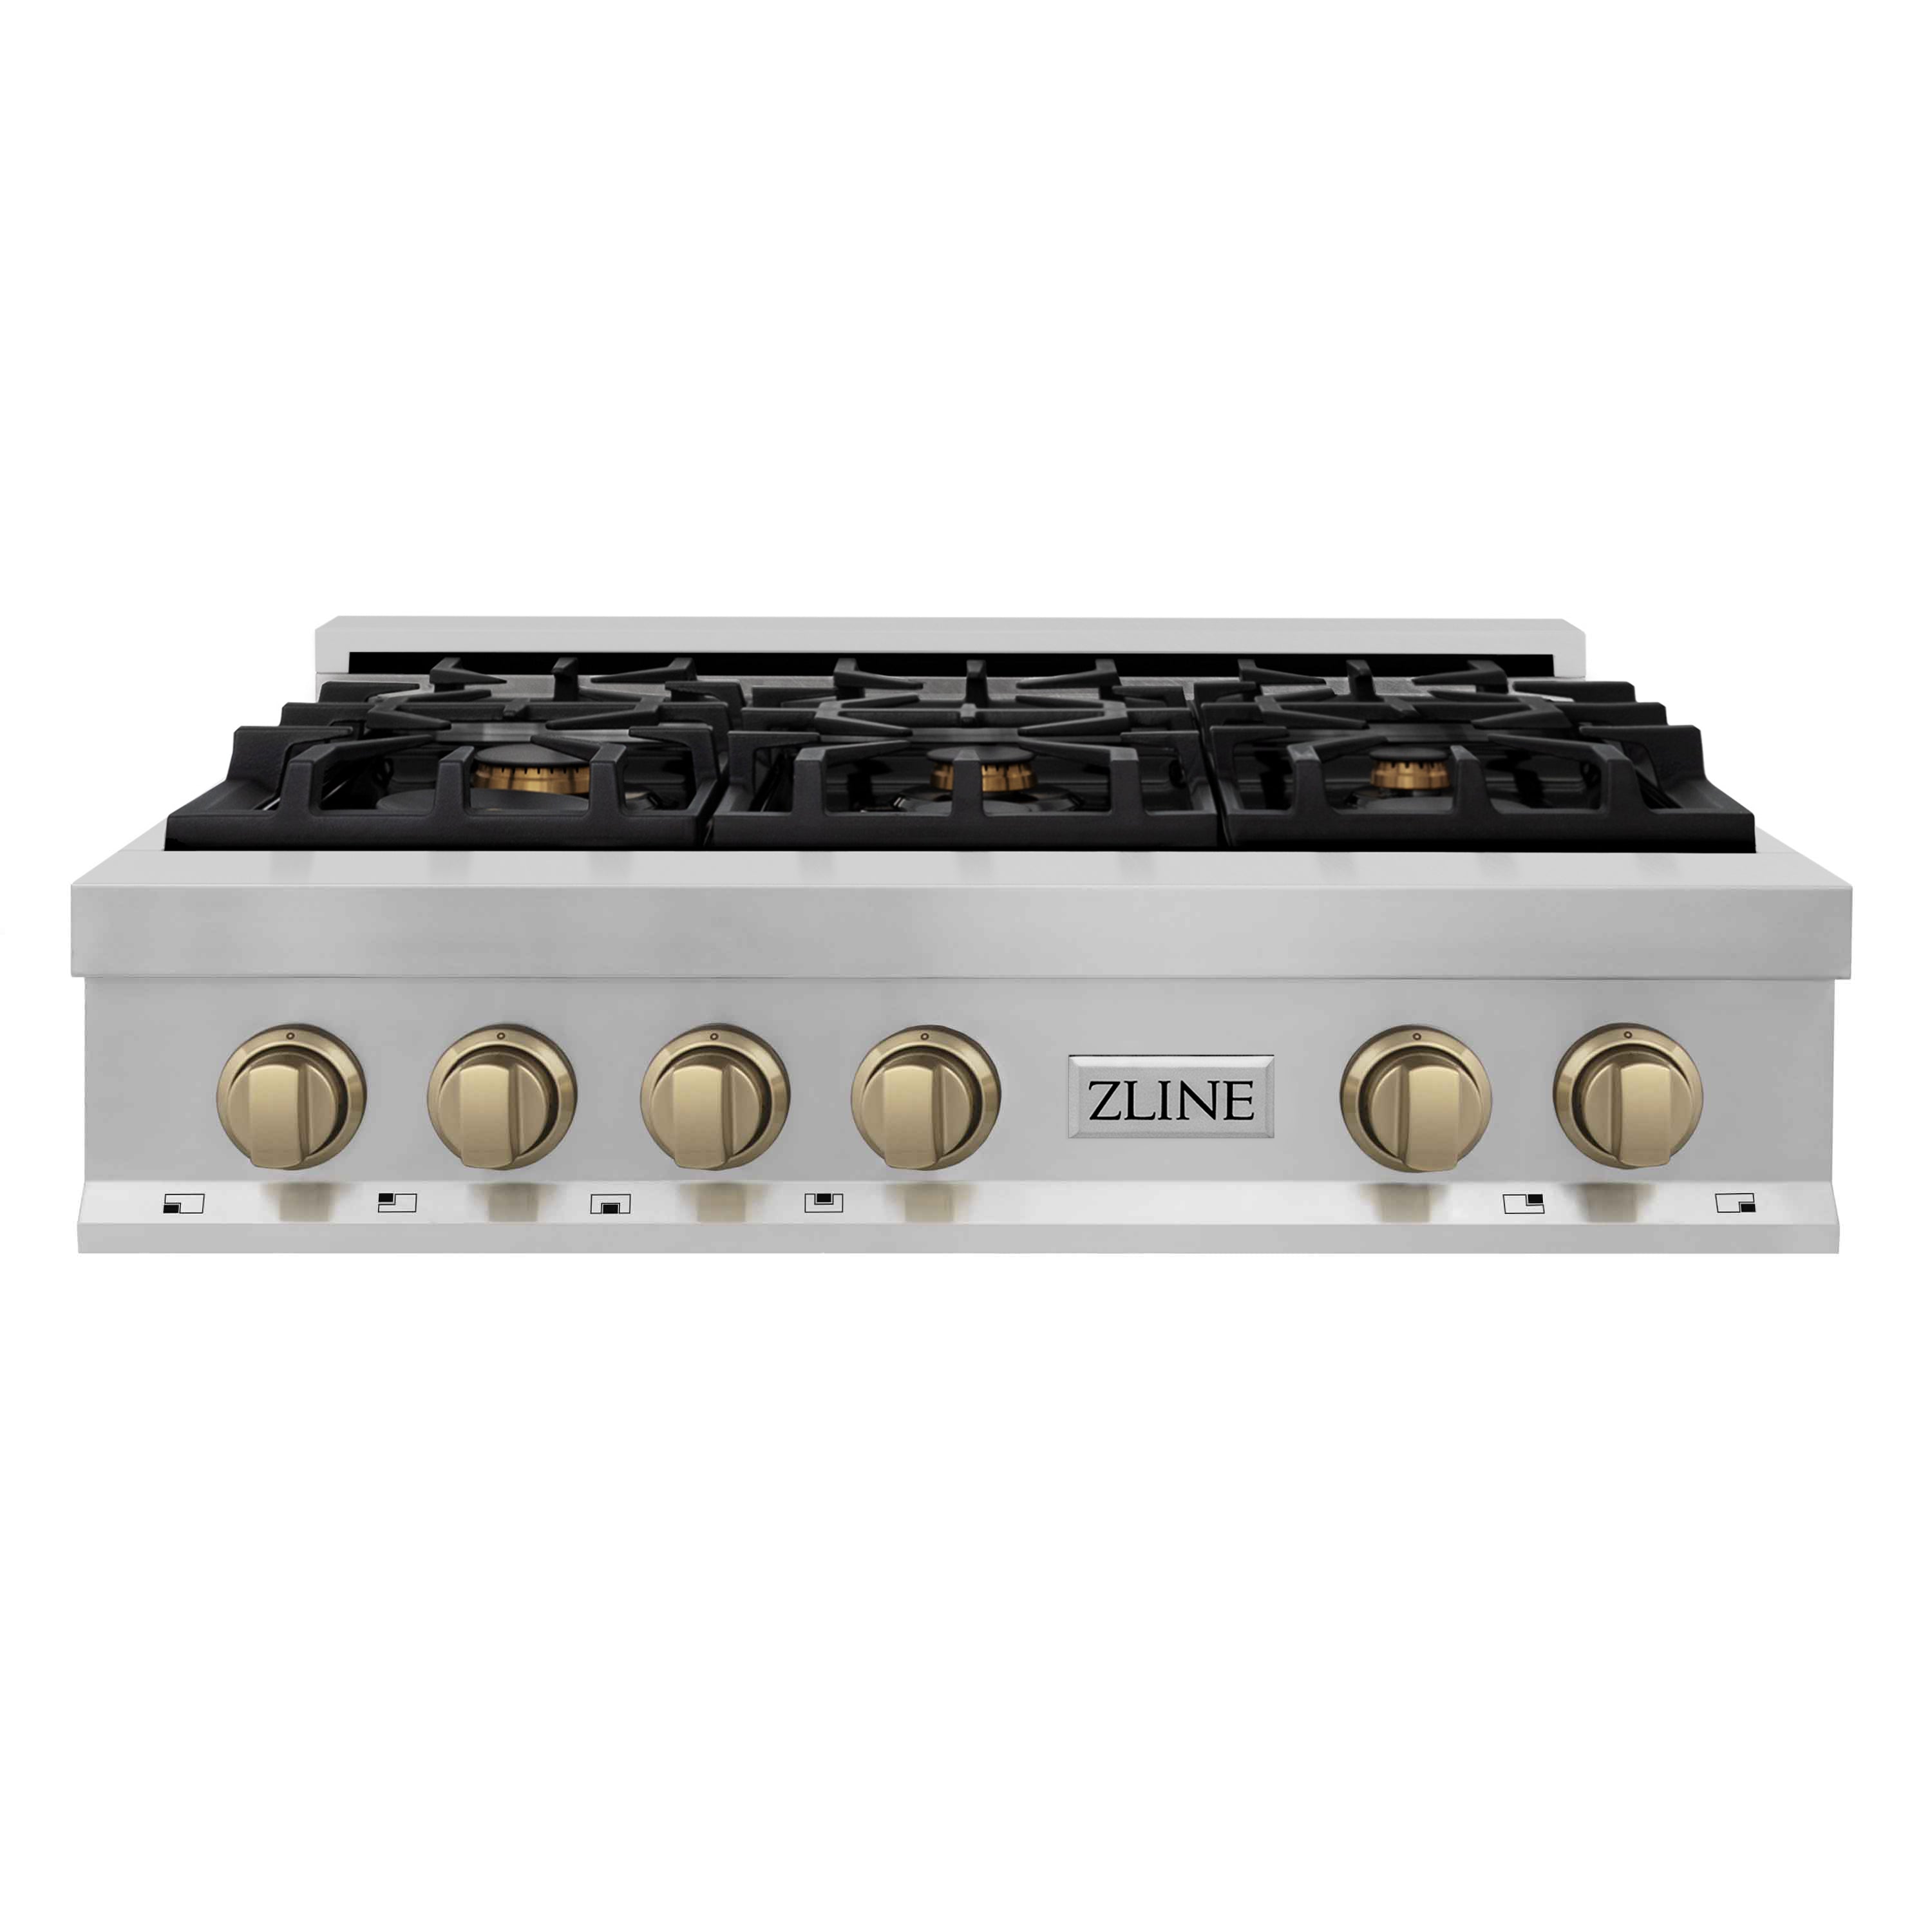 ZLINE Autograph Edition 36 in. 6-Burner Gas Rangetop in Stainless Steel with Champagne Bronze Accents and Black Porcelain Cooktop front.